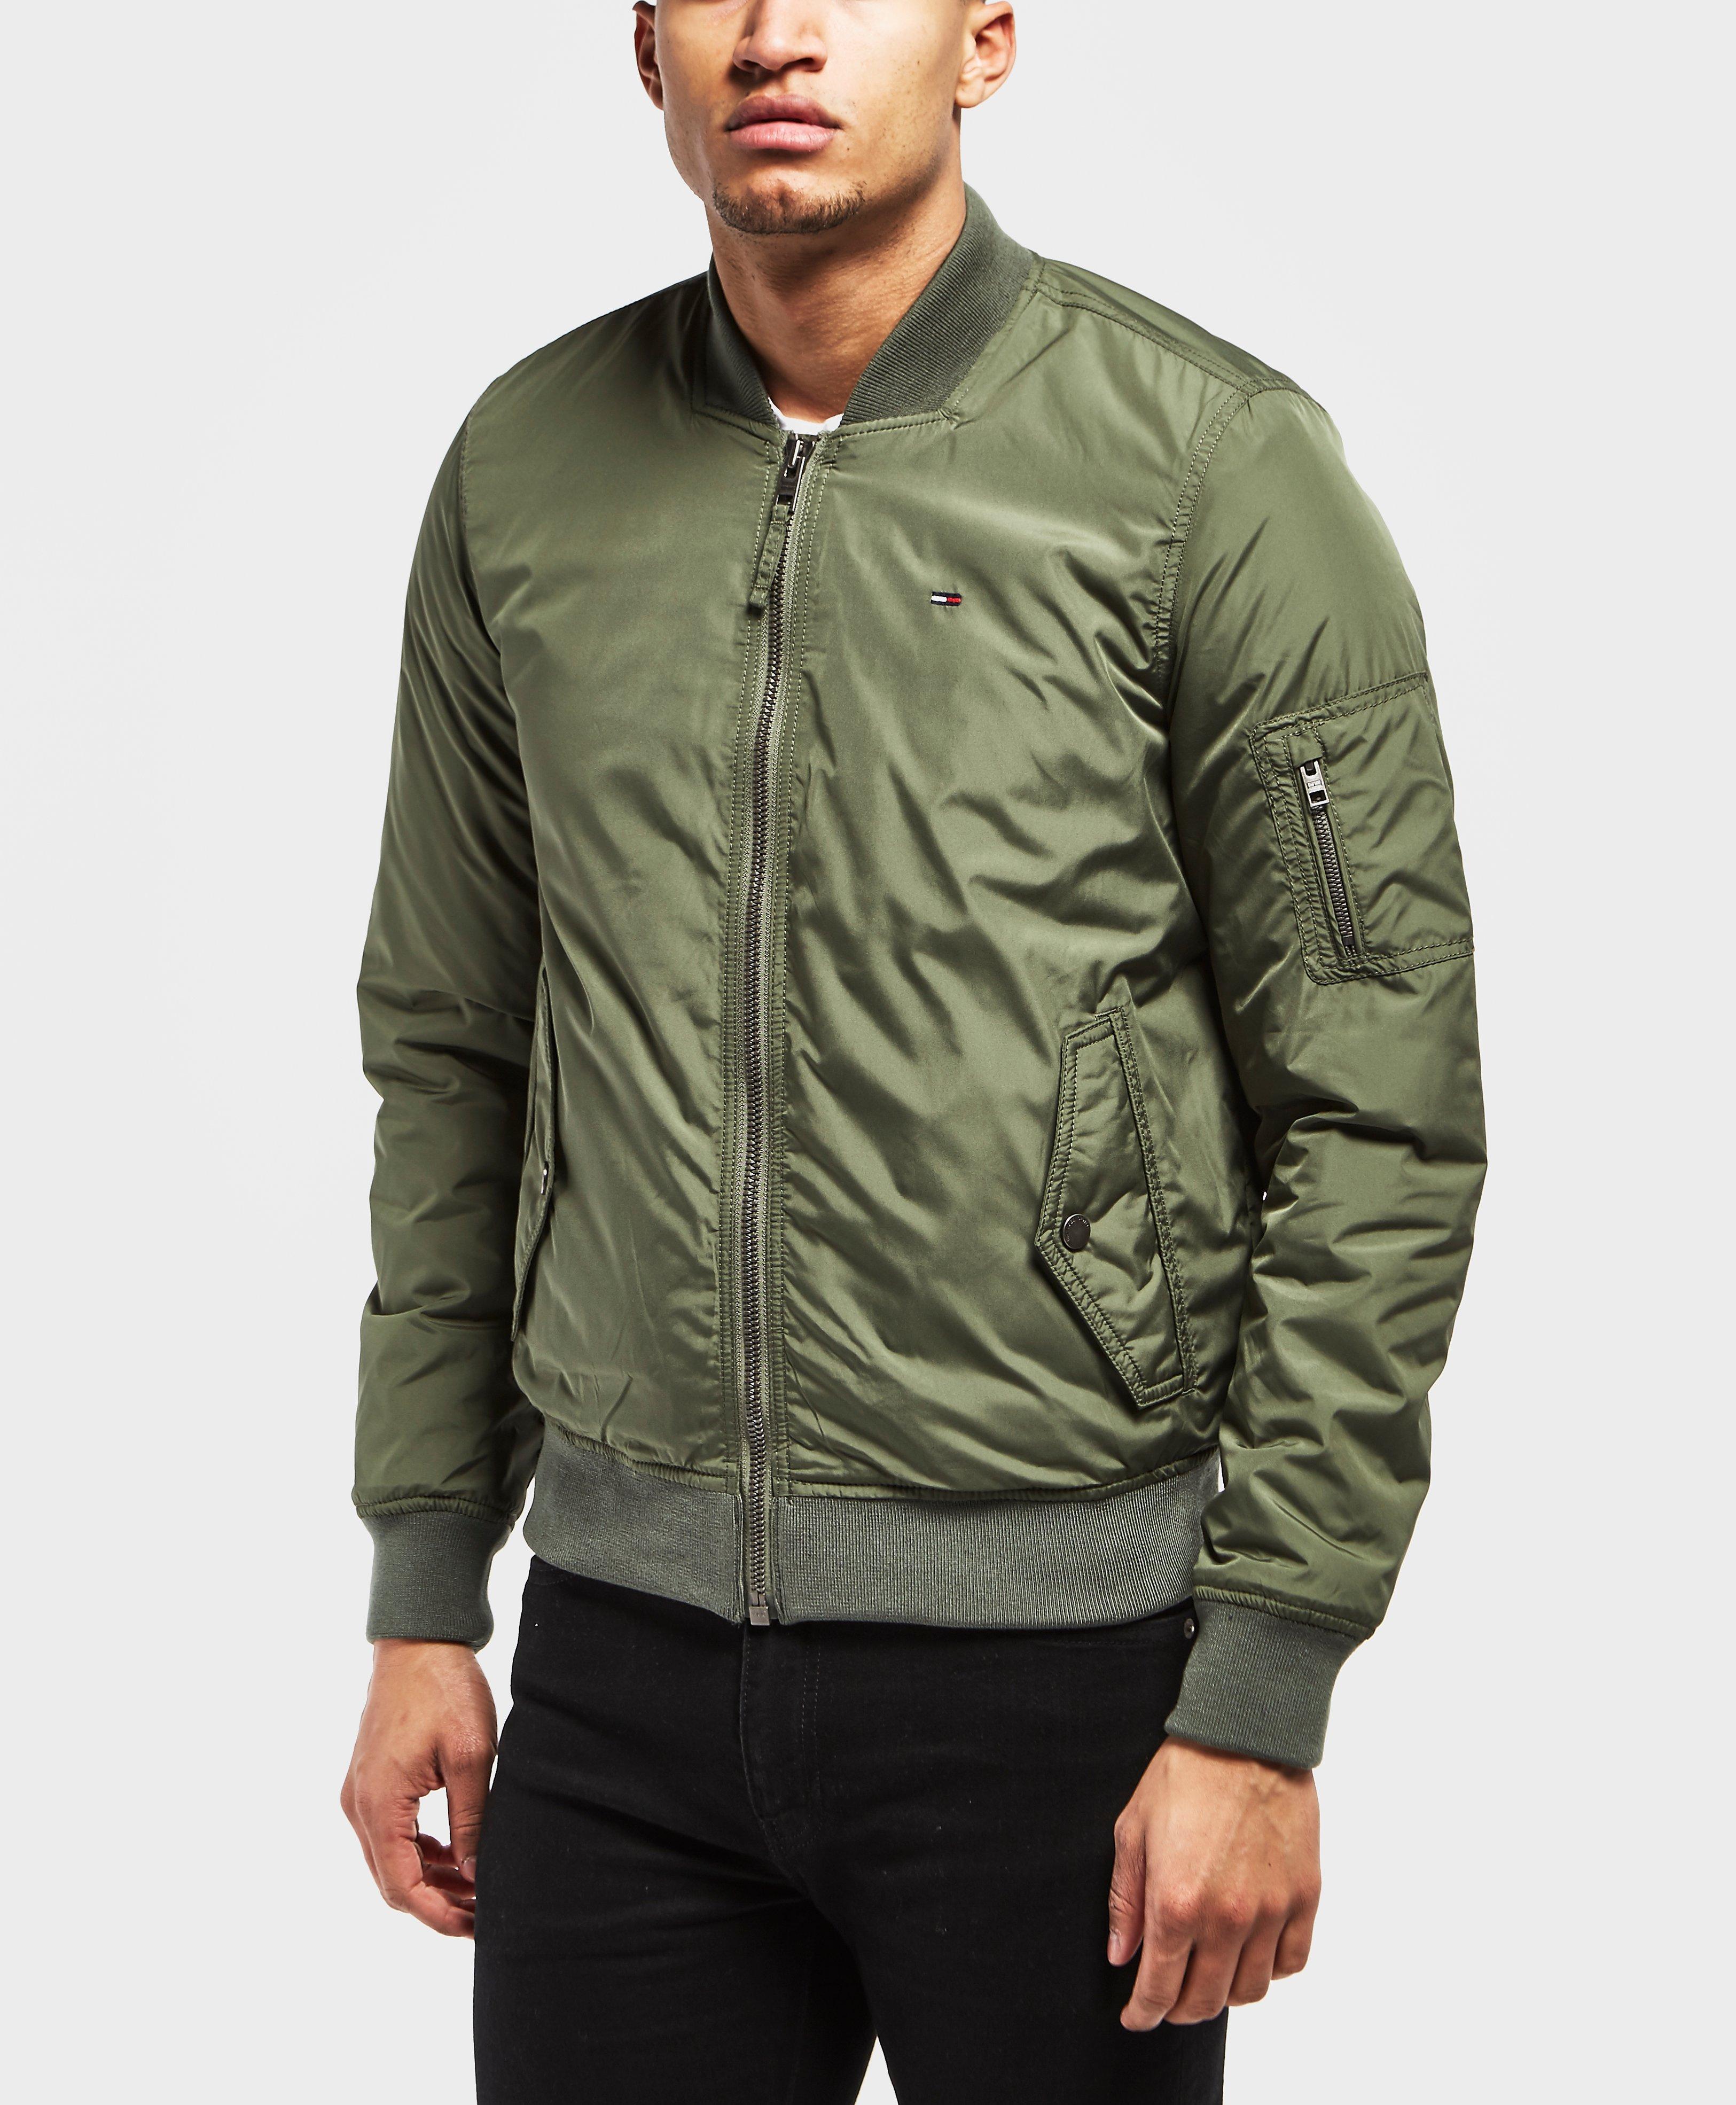 Tommy Hilfiger Padded Bomber Jacket in Green for Men - Lyst